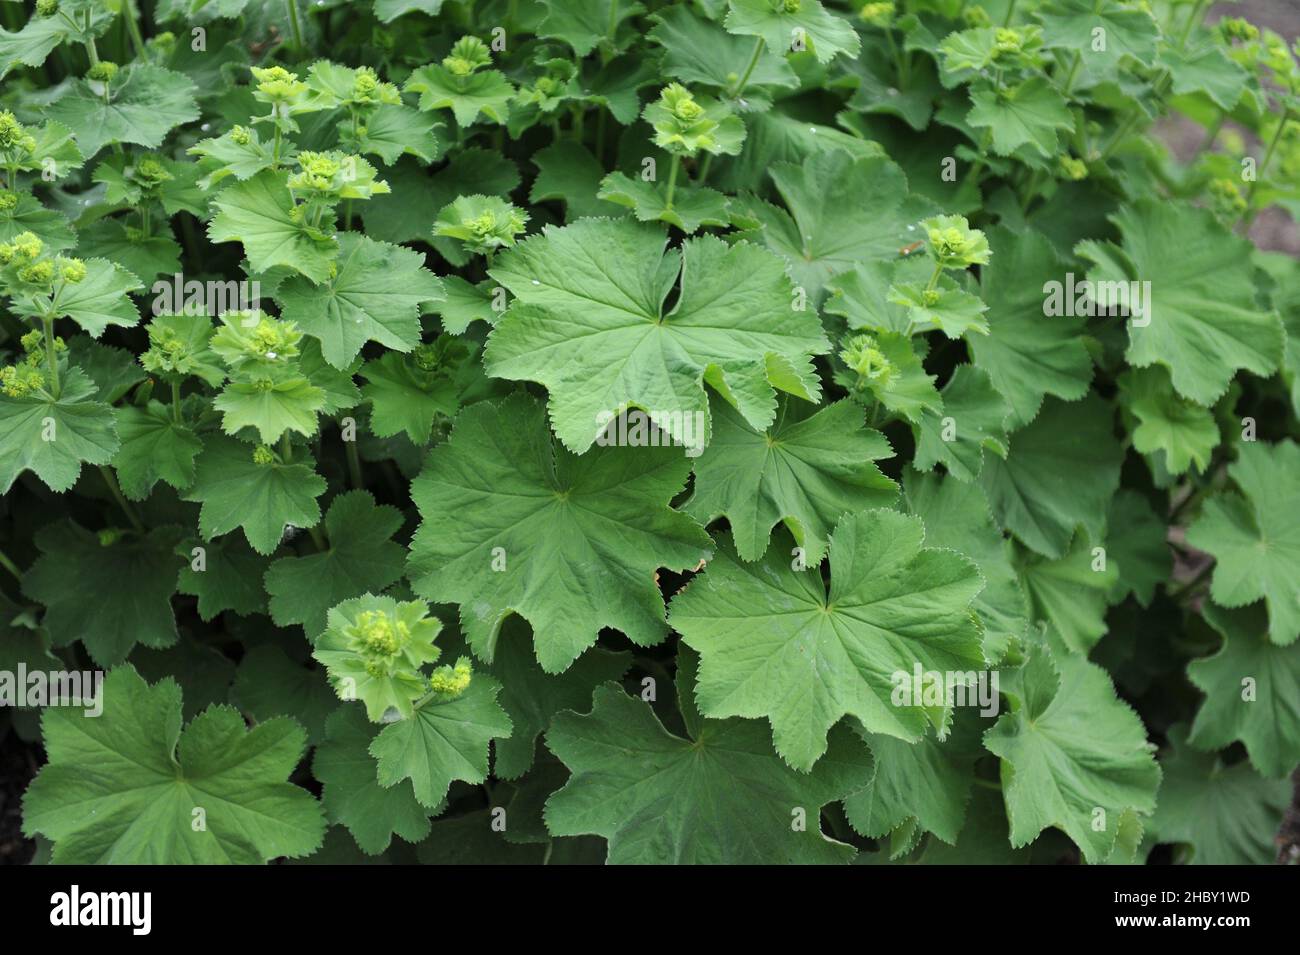 Lady's mantle (Alchemilla mollis) blooms in a garden in May Stock Photo